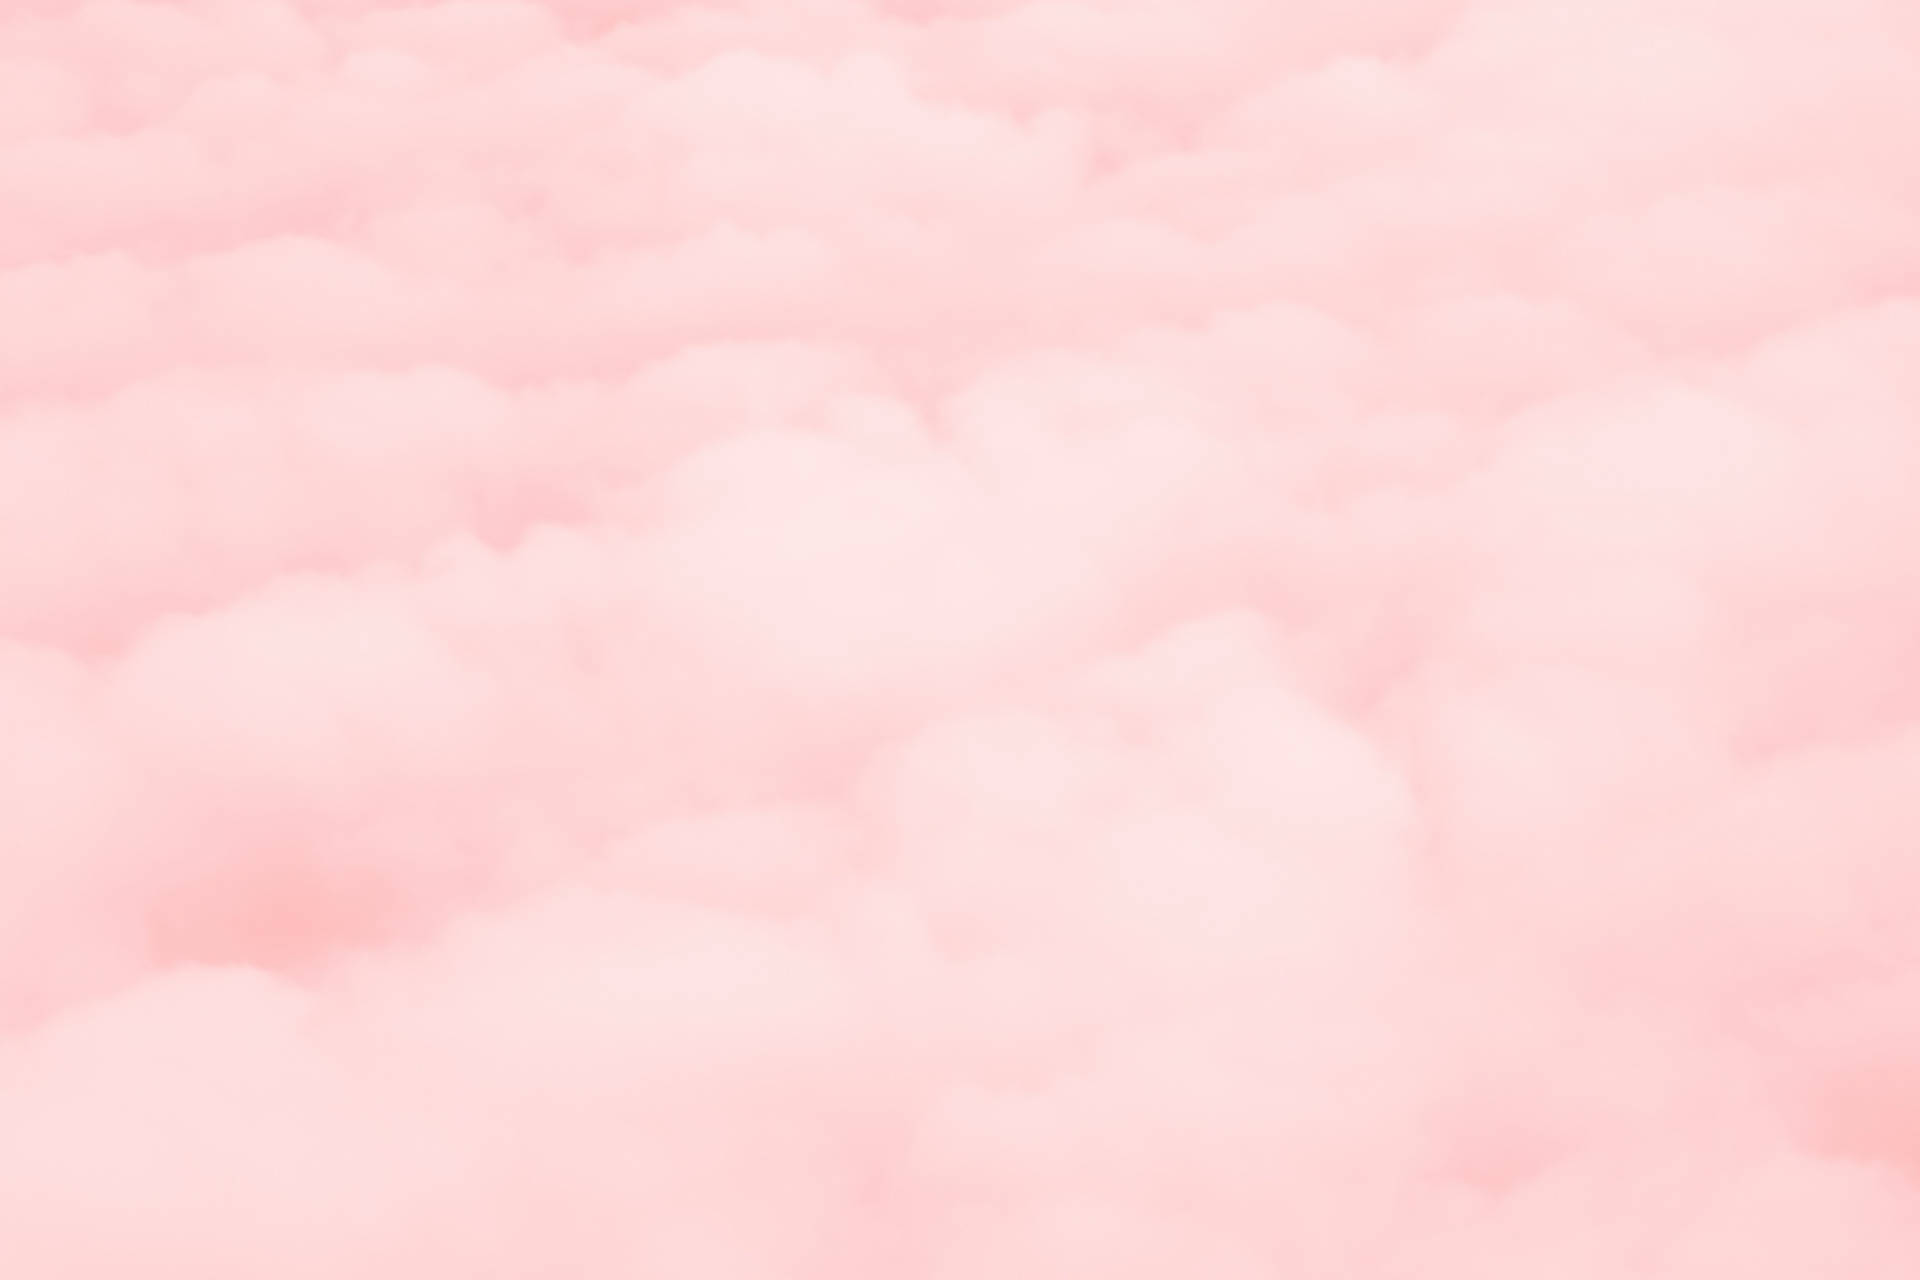 Cotton Candy Clouds Pretty Aesthetic Background